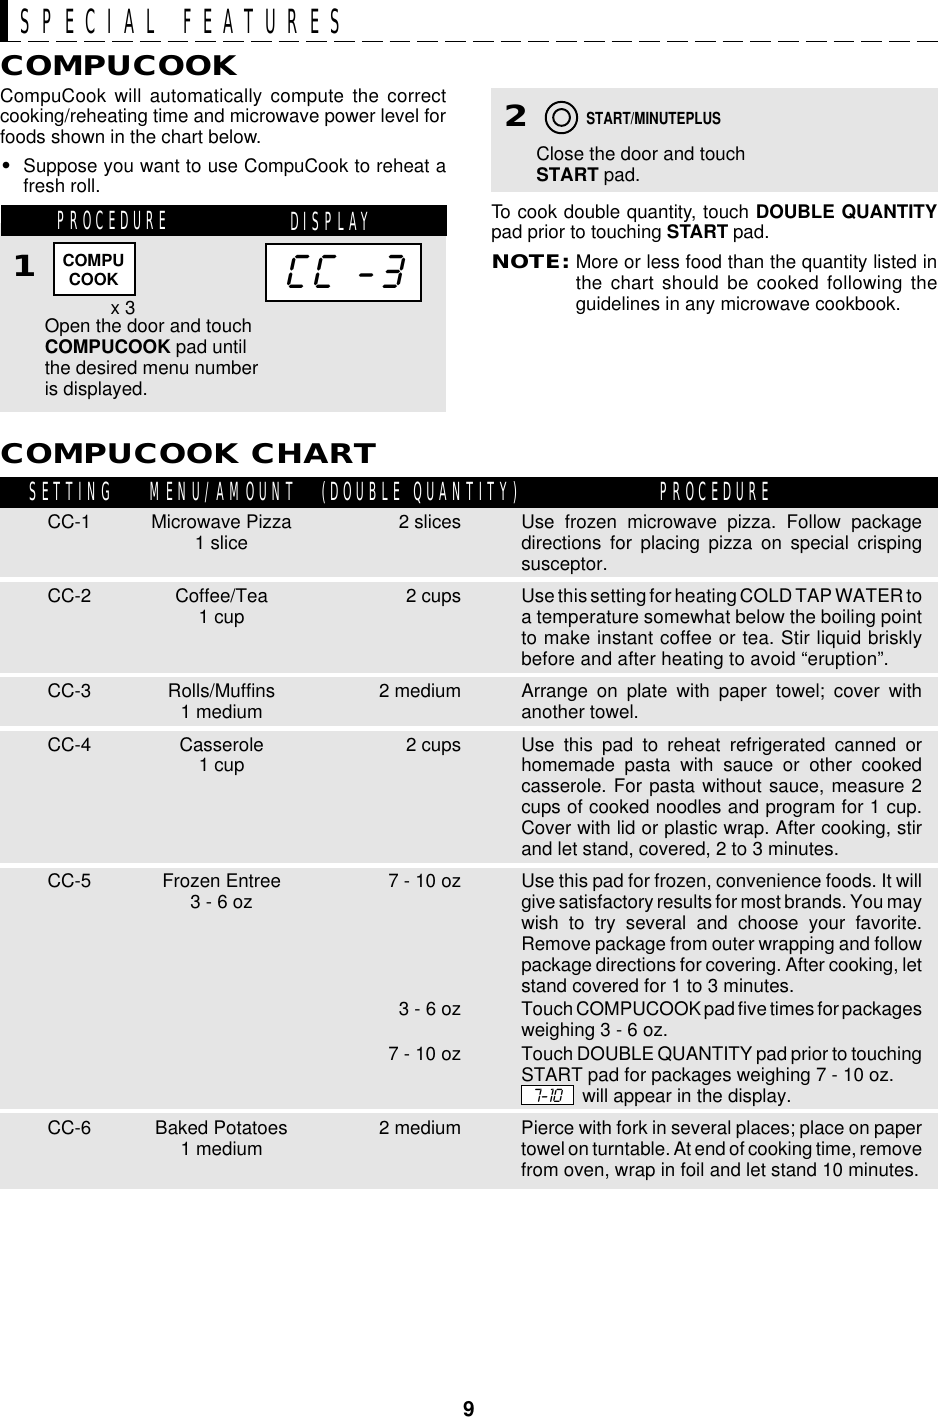 9CompuCook will automatically compute the correctcooking/reheating time and microwave power level forfoods shown in the chart below.•Suppose you want to use CompuCook to reheat afresh roll.COMPUCOOKSPECIAL FEATURESPROCEDURE DISPLAYCOMPUCOOK CHARTCC-1CC-2CC-3CC-4CC-5CC-6SETTING PROCEDUREMENU/AMOUNT 2 slices2 cups2 medium2 cups7 - 10 oz3 - 6 oz7 - 10 oz2 medium(DOUBLE QUANTITY)Microwave Pizza1 sliceCoffee/Tea1 cupRolls/Muffins1 mediumCasserole1 cupFrozen Entree3 - 6 ozBaked Potatoes1 mediumCC -3COMPUCOOKPROCEDURE DISPLAY1Open the door and touchCOMPUCOOK pad untilthe desired menu numberis displayed.x 3Close the door and touchSTART pad.2START/MINUTEPLUSTo cook double quantity, touch DOUBLE QUANTITYpad prior to touching START pad.NOTE:More or less food than the quantity listed inthe chart should be cooked following theguidelines in any microwave cookbook.Use frozen microwave pizza. Follow packagedirections for placing pizza on special crispingsusceptor.Use this setting for heating COLD TAP WATER toa temperature somewhat below the boiling pointto make instant coffee or tea. Stir liquid brisklybefore and after heating to avoid “eruption”.Arrange on plate with paper towel; cover withanother towel.Use this pad to reheat refrigerated canned orhomemade pasta with sauce or other cookedcasserole. For pasta without sauce, measure 2cups of cooked noodles and program for 1 cup.Cover with lid or plastic wrap. After cooking, stirand let stand, covered, 2 to 3 minutes.Use this pad for frozen, convenience foods. It willgive satisfactory results for most brands. You maywish to try several and choose your favorite.Remove package from outer wrapping and followpackage directions for covering. After cooking, letstand covered for 1 to 3 minutes.Touch COMPUCOOK pad five times for packagesweighing 3 - 6 oz.Touch DOUBLE QUANTITY pad prior to touchingSTART pad for packages weighing 7 - 10 oz.  7-10    will appear in the display.Pierce with fork in several places; place on papertowel on turntable. At end of cooking time, removefrom oven, wrap in foil and let stand 10 minutes.